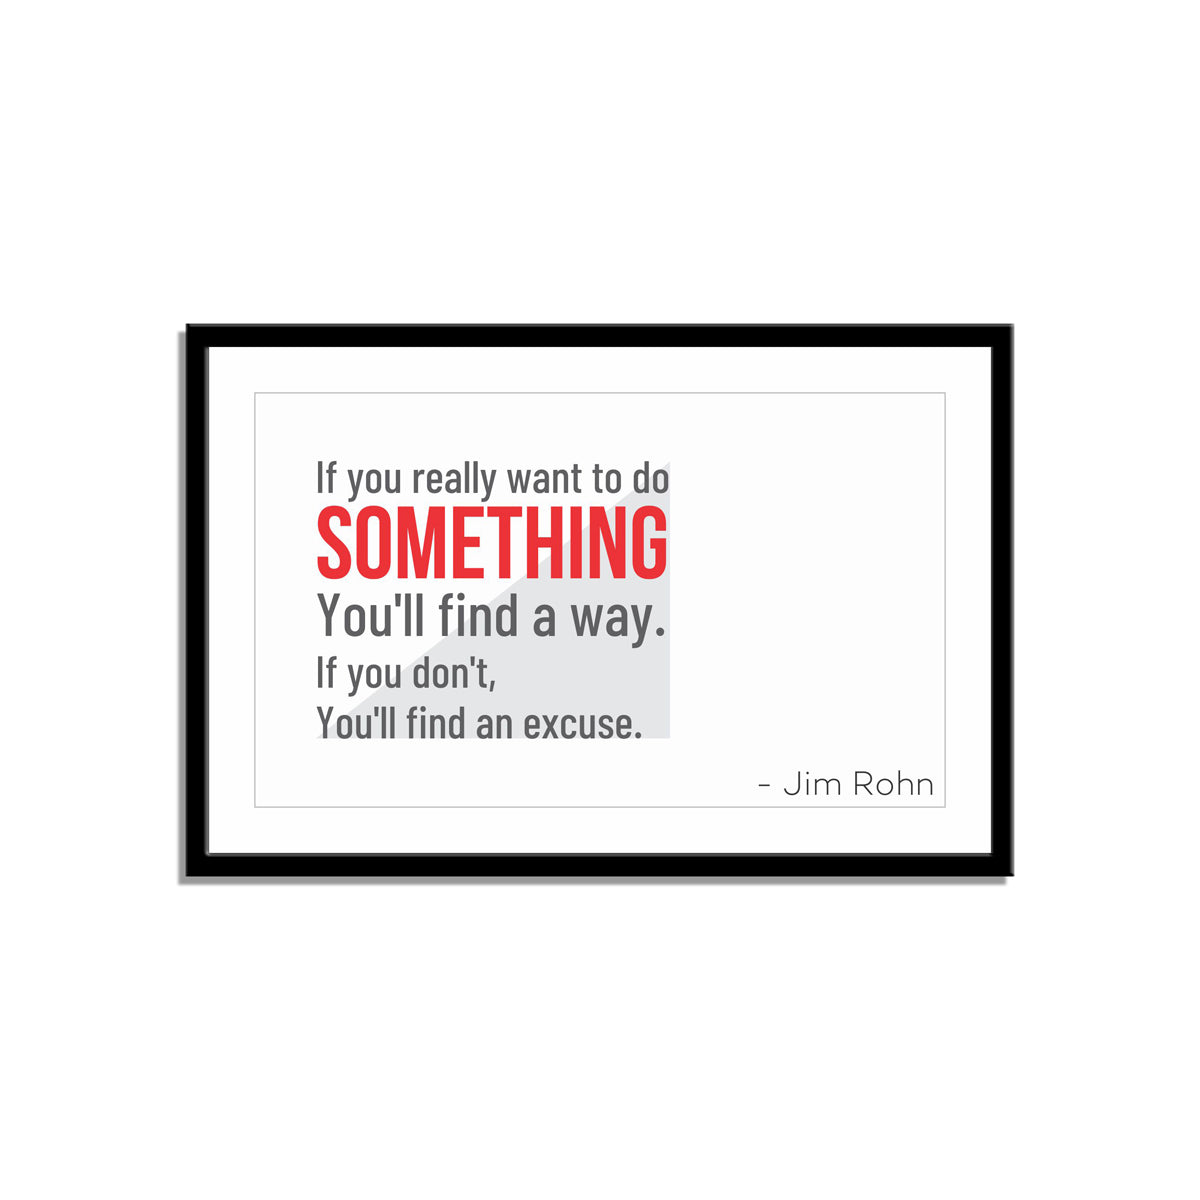 If you really want to do something, you'll find a way. If you don't, you'll find an excuse.